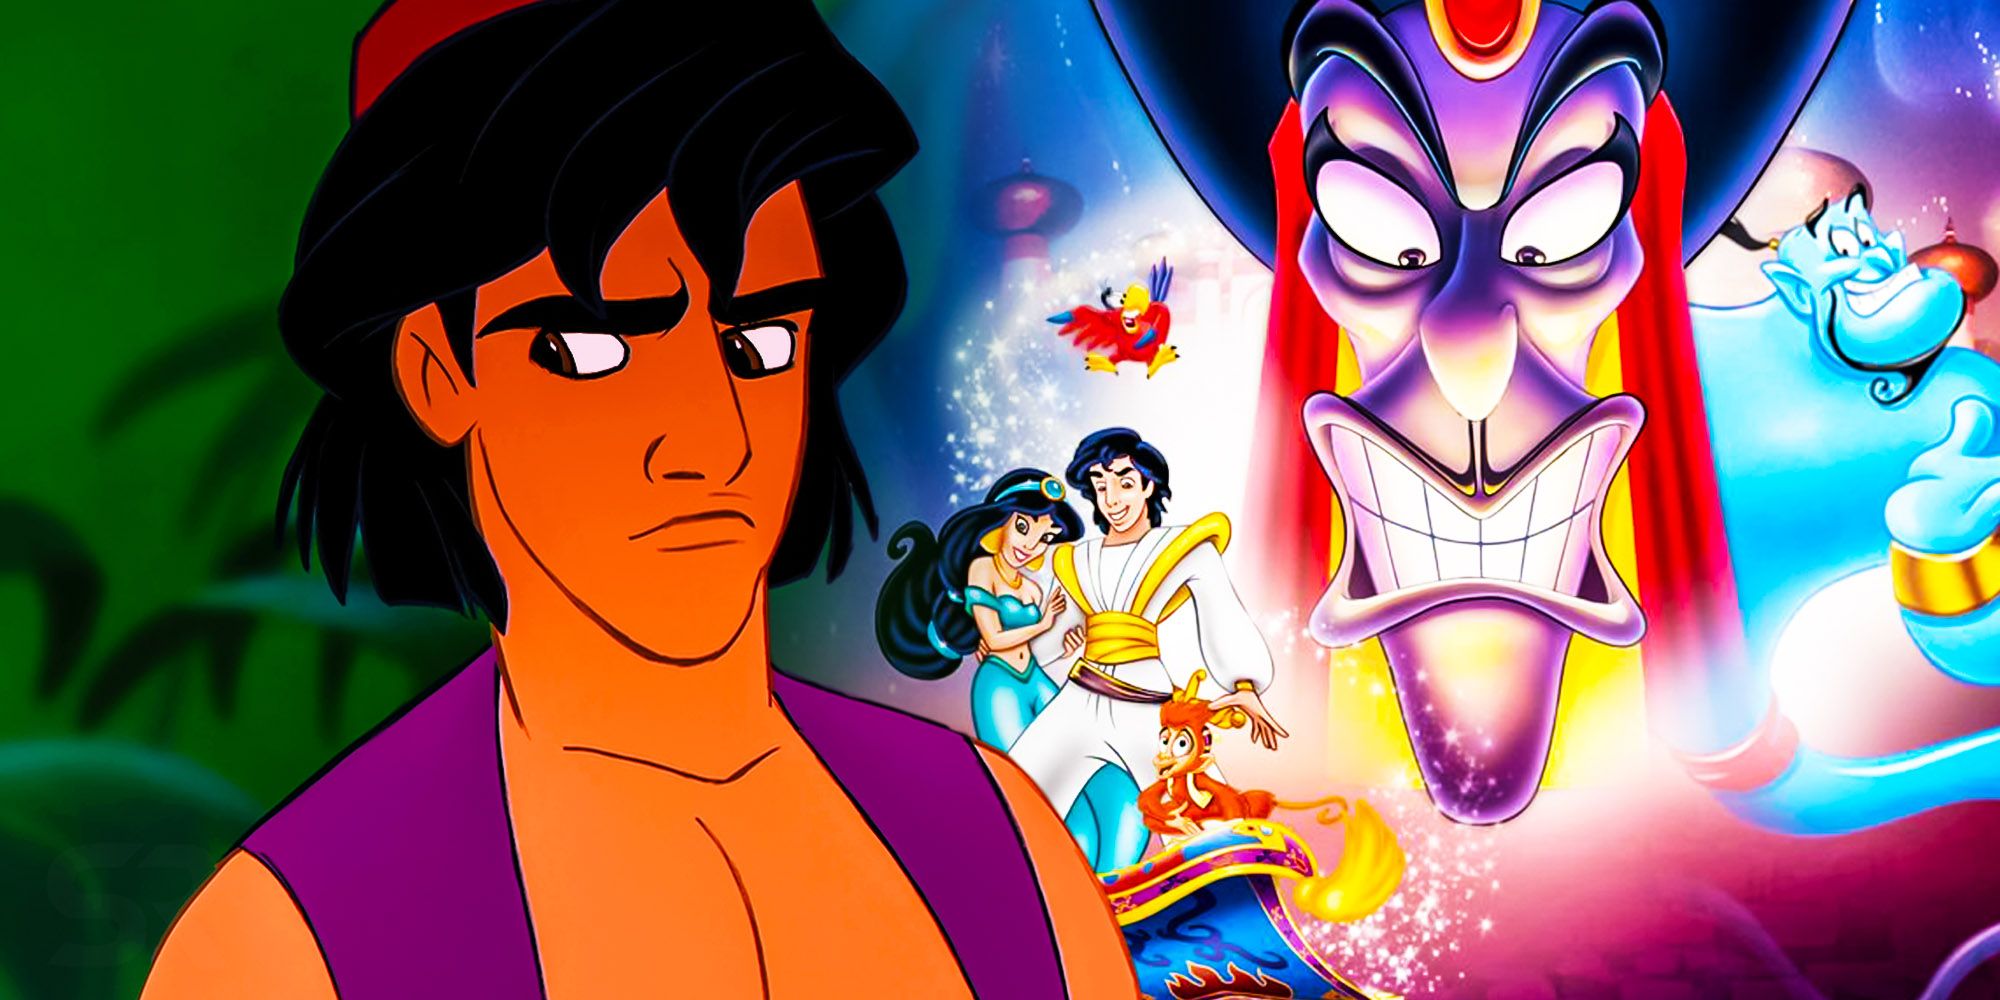 Why The Aladdin Sequel Wasn't Shown In Theaters (Or On TV)